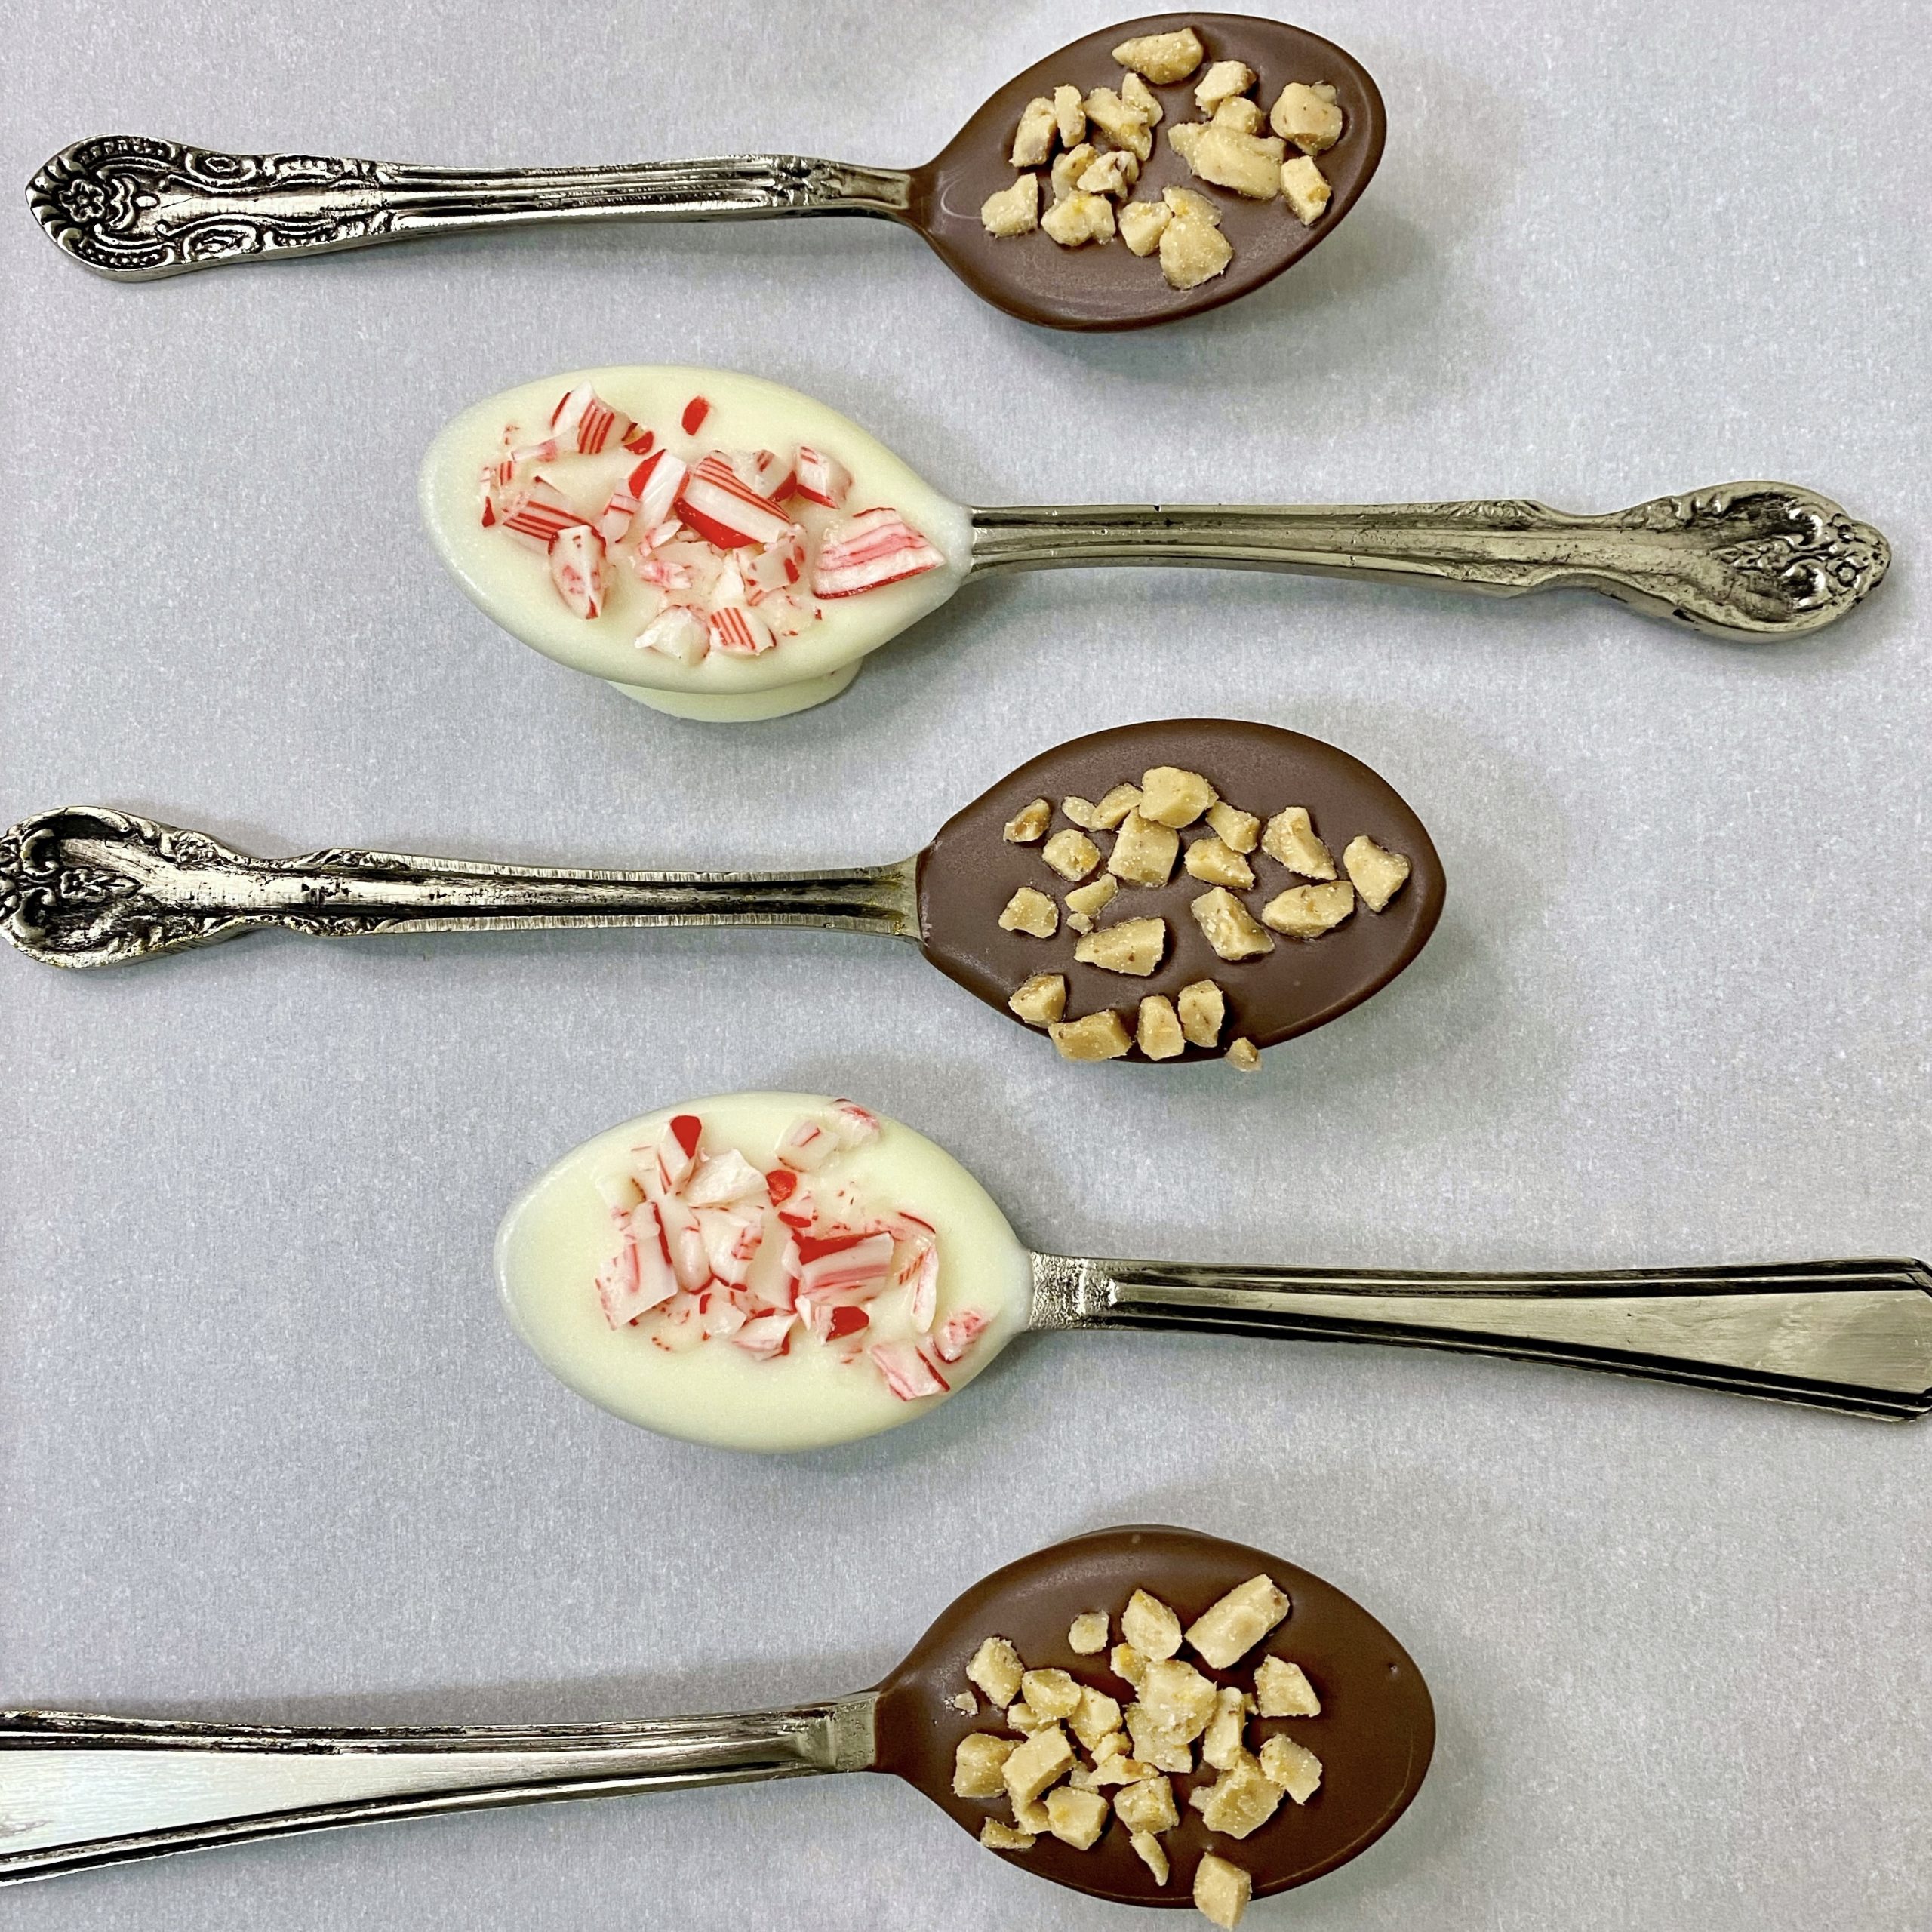 Chocolate dipped spoons on a tray with parchment paper.